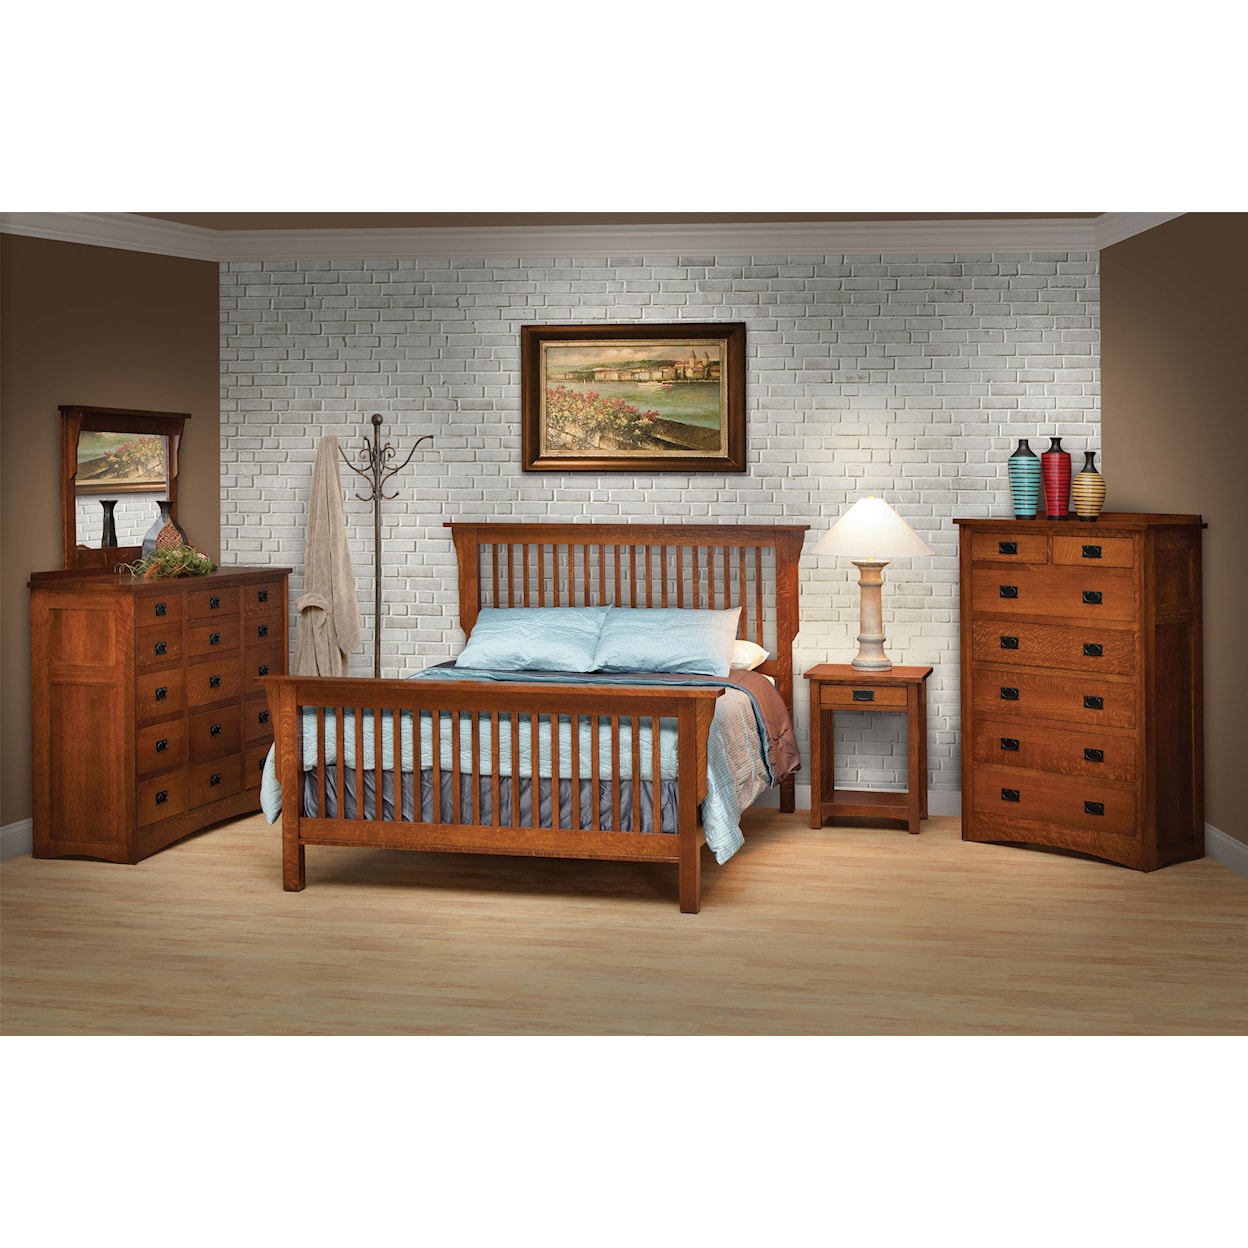 Daniels Amish Mission Queen Bedroom Group